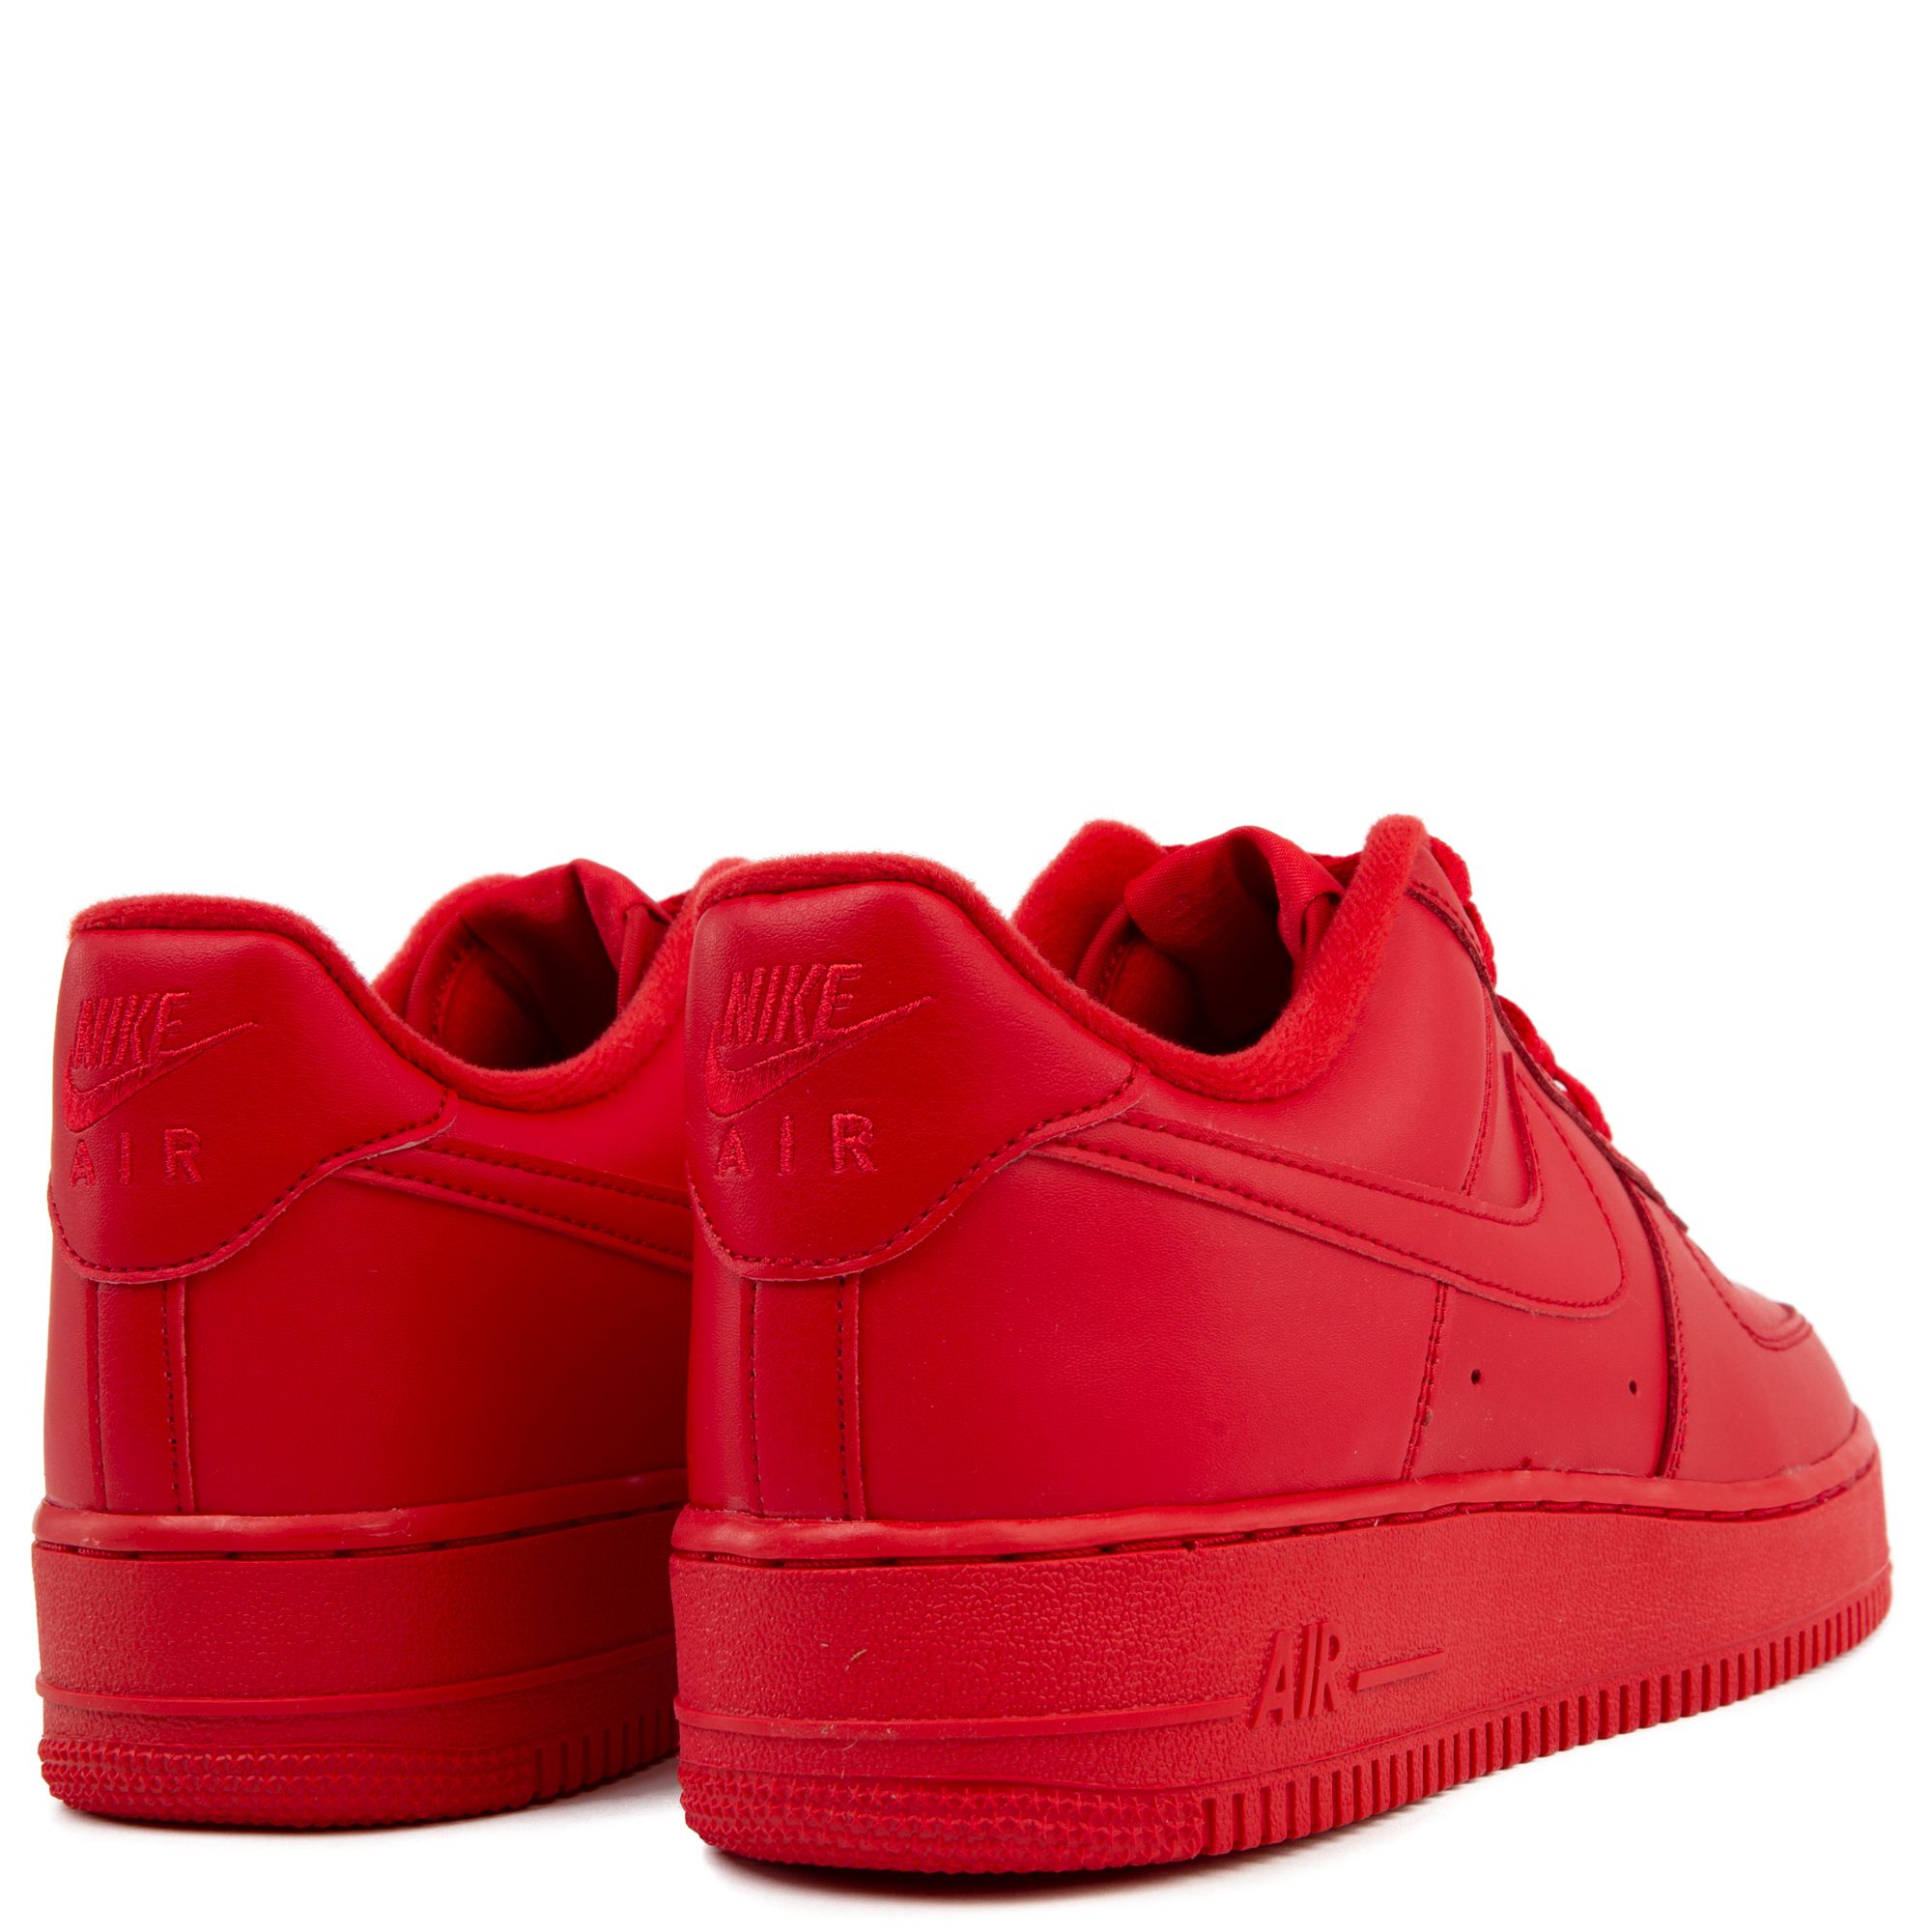 QuickSchopes 029 - Nike Air Force 1 LV8 UV Volt and Siren Red - Schopes 